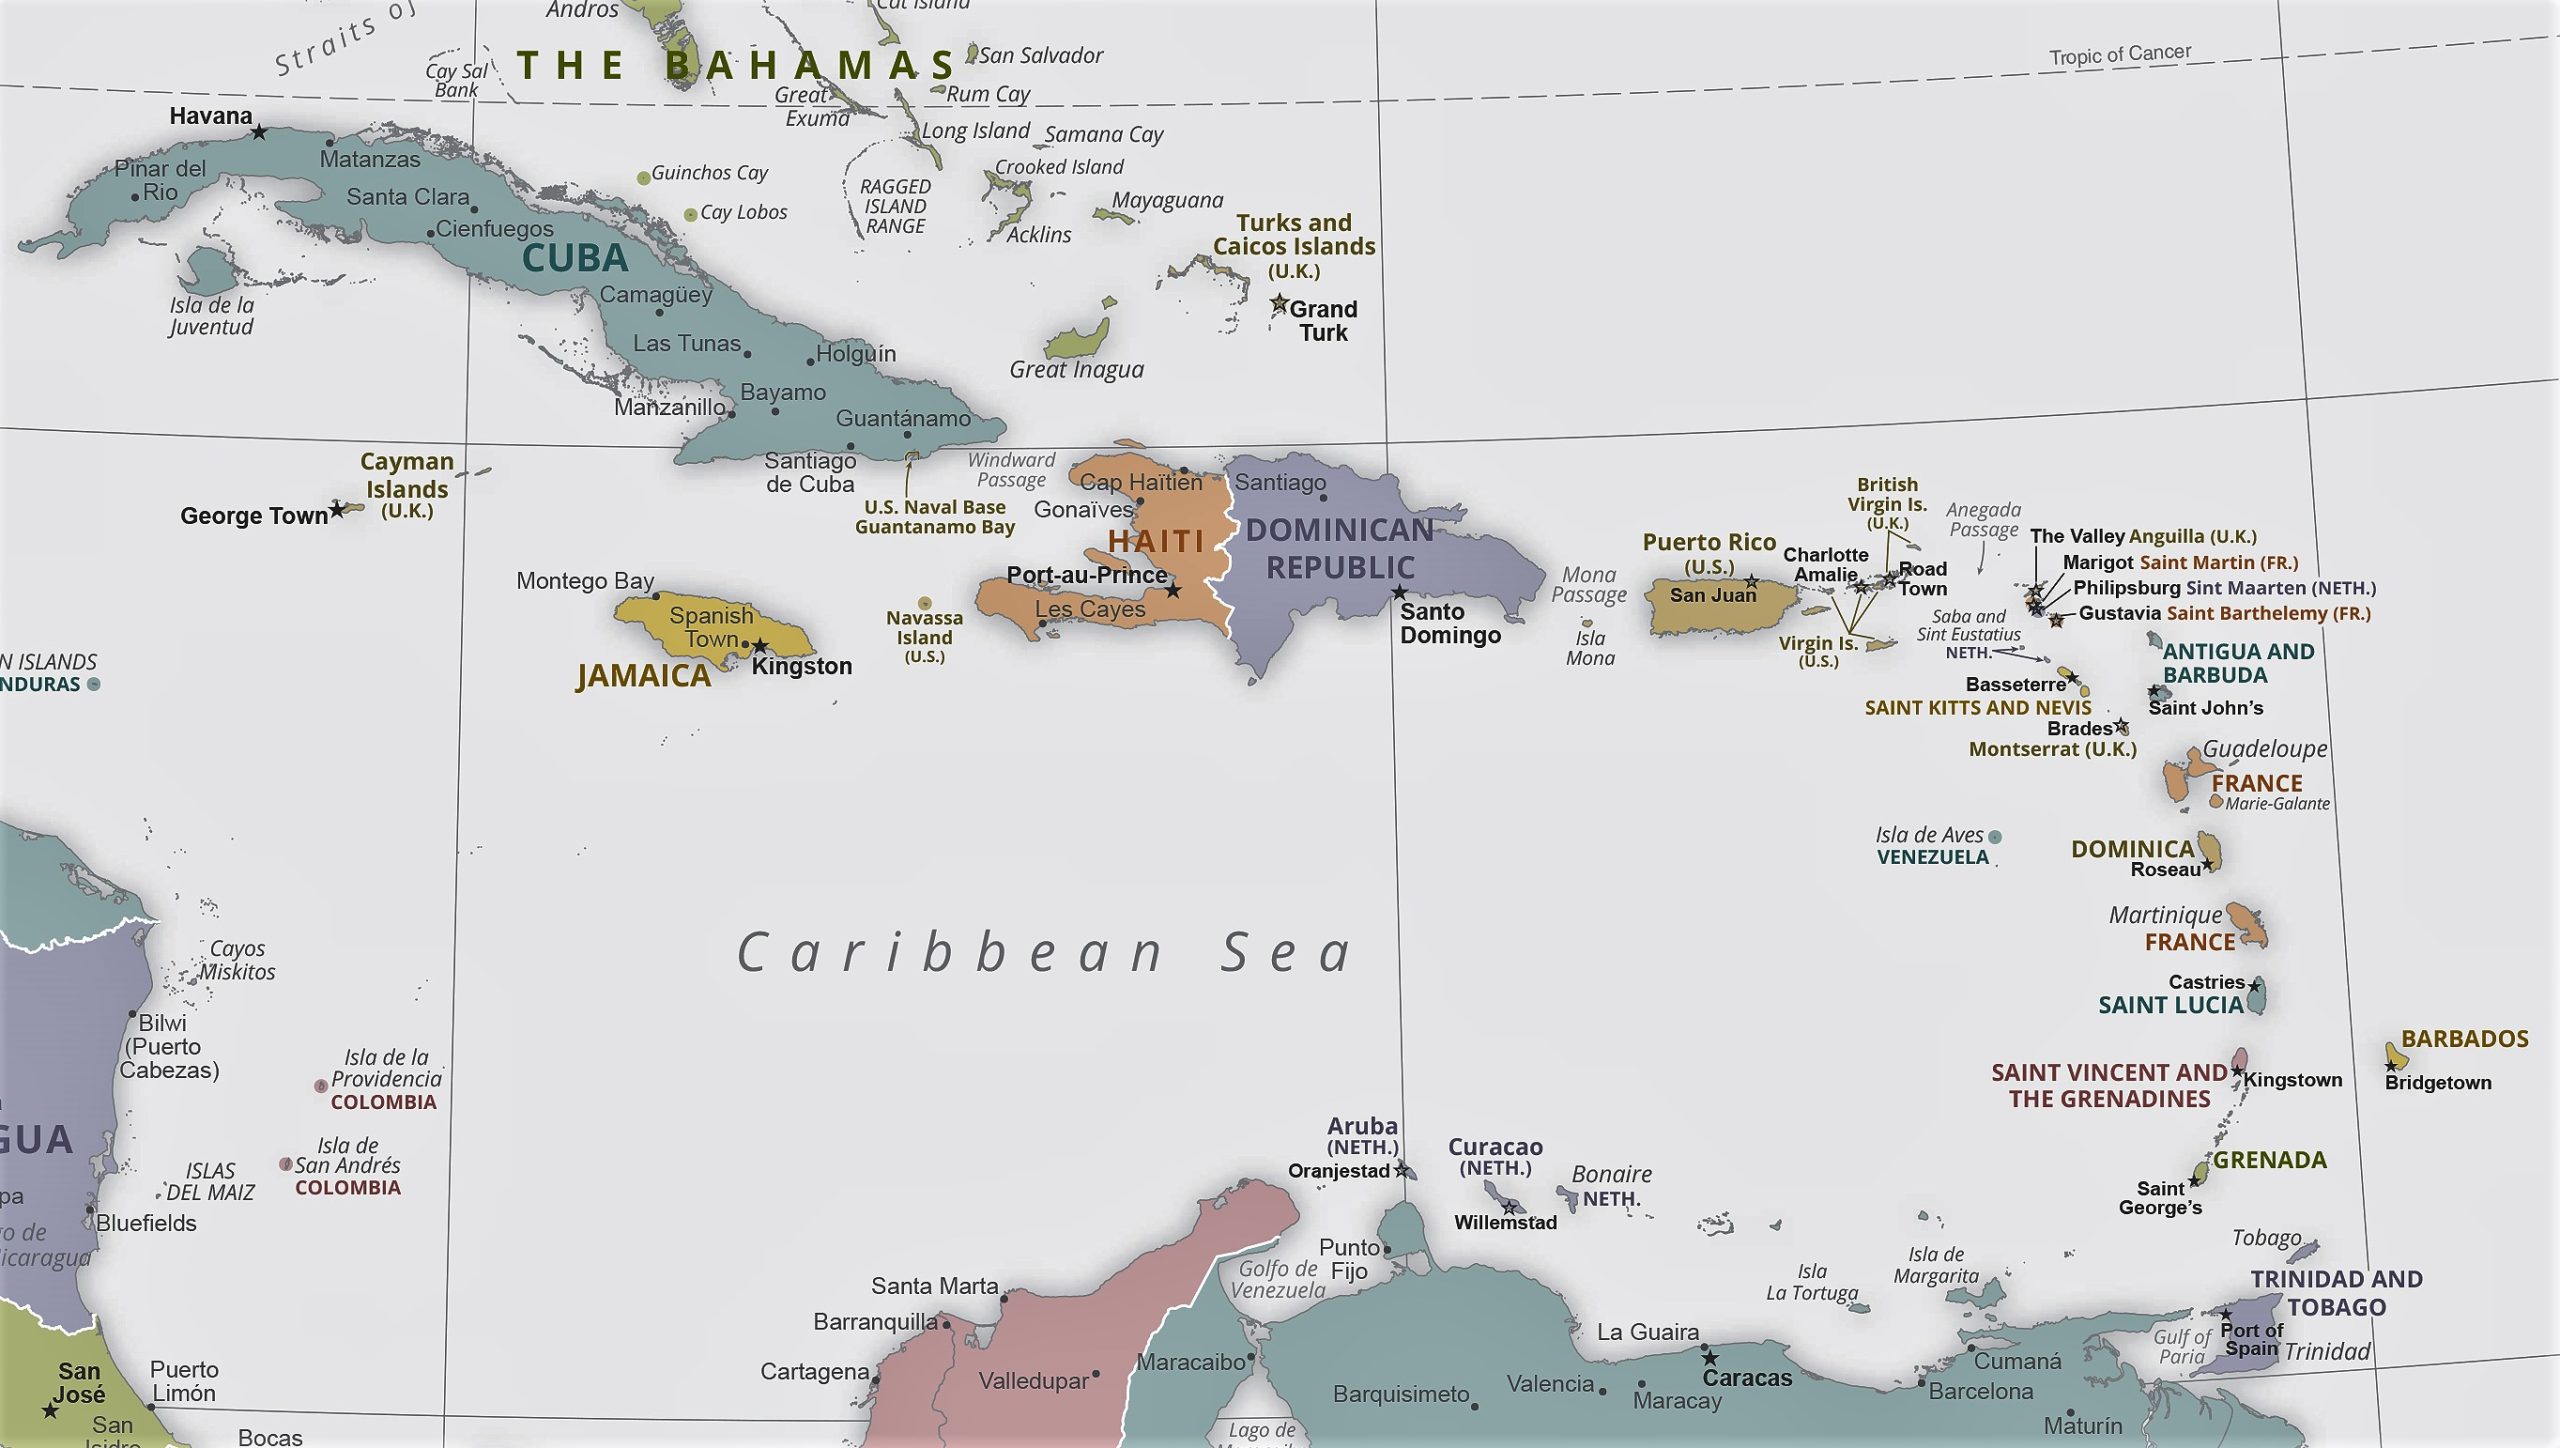 The Caribbean Threat Environment: Reshaped by Climate Change and Great Power Competition